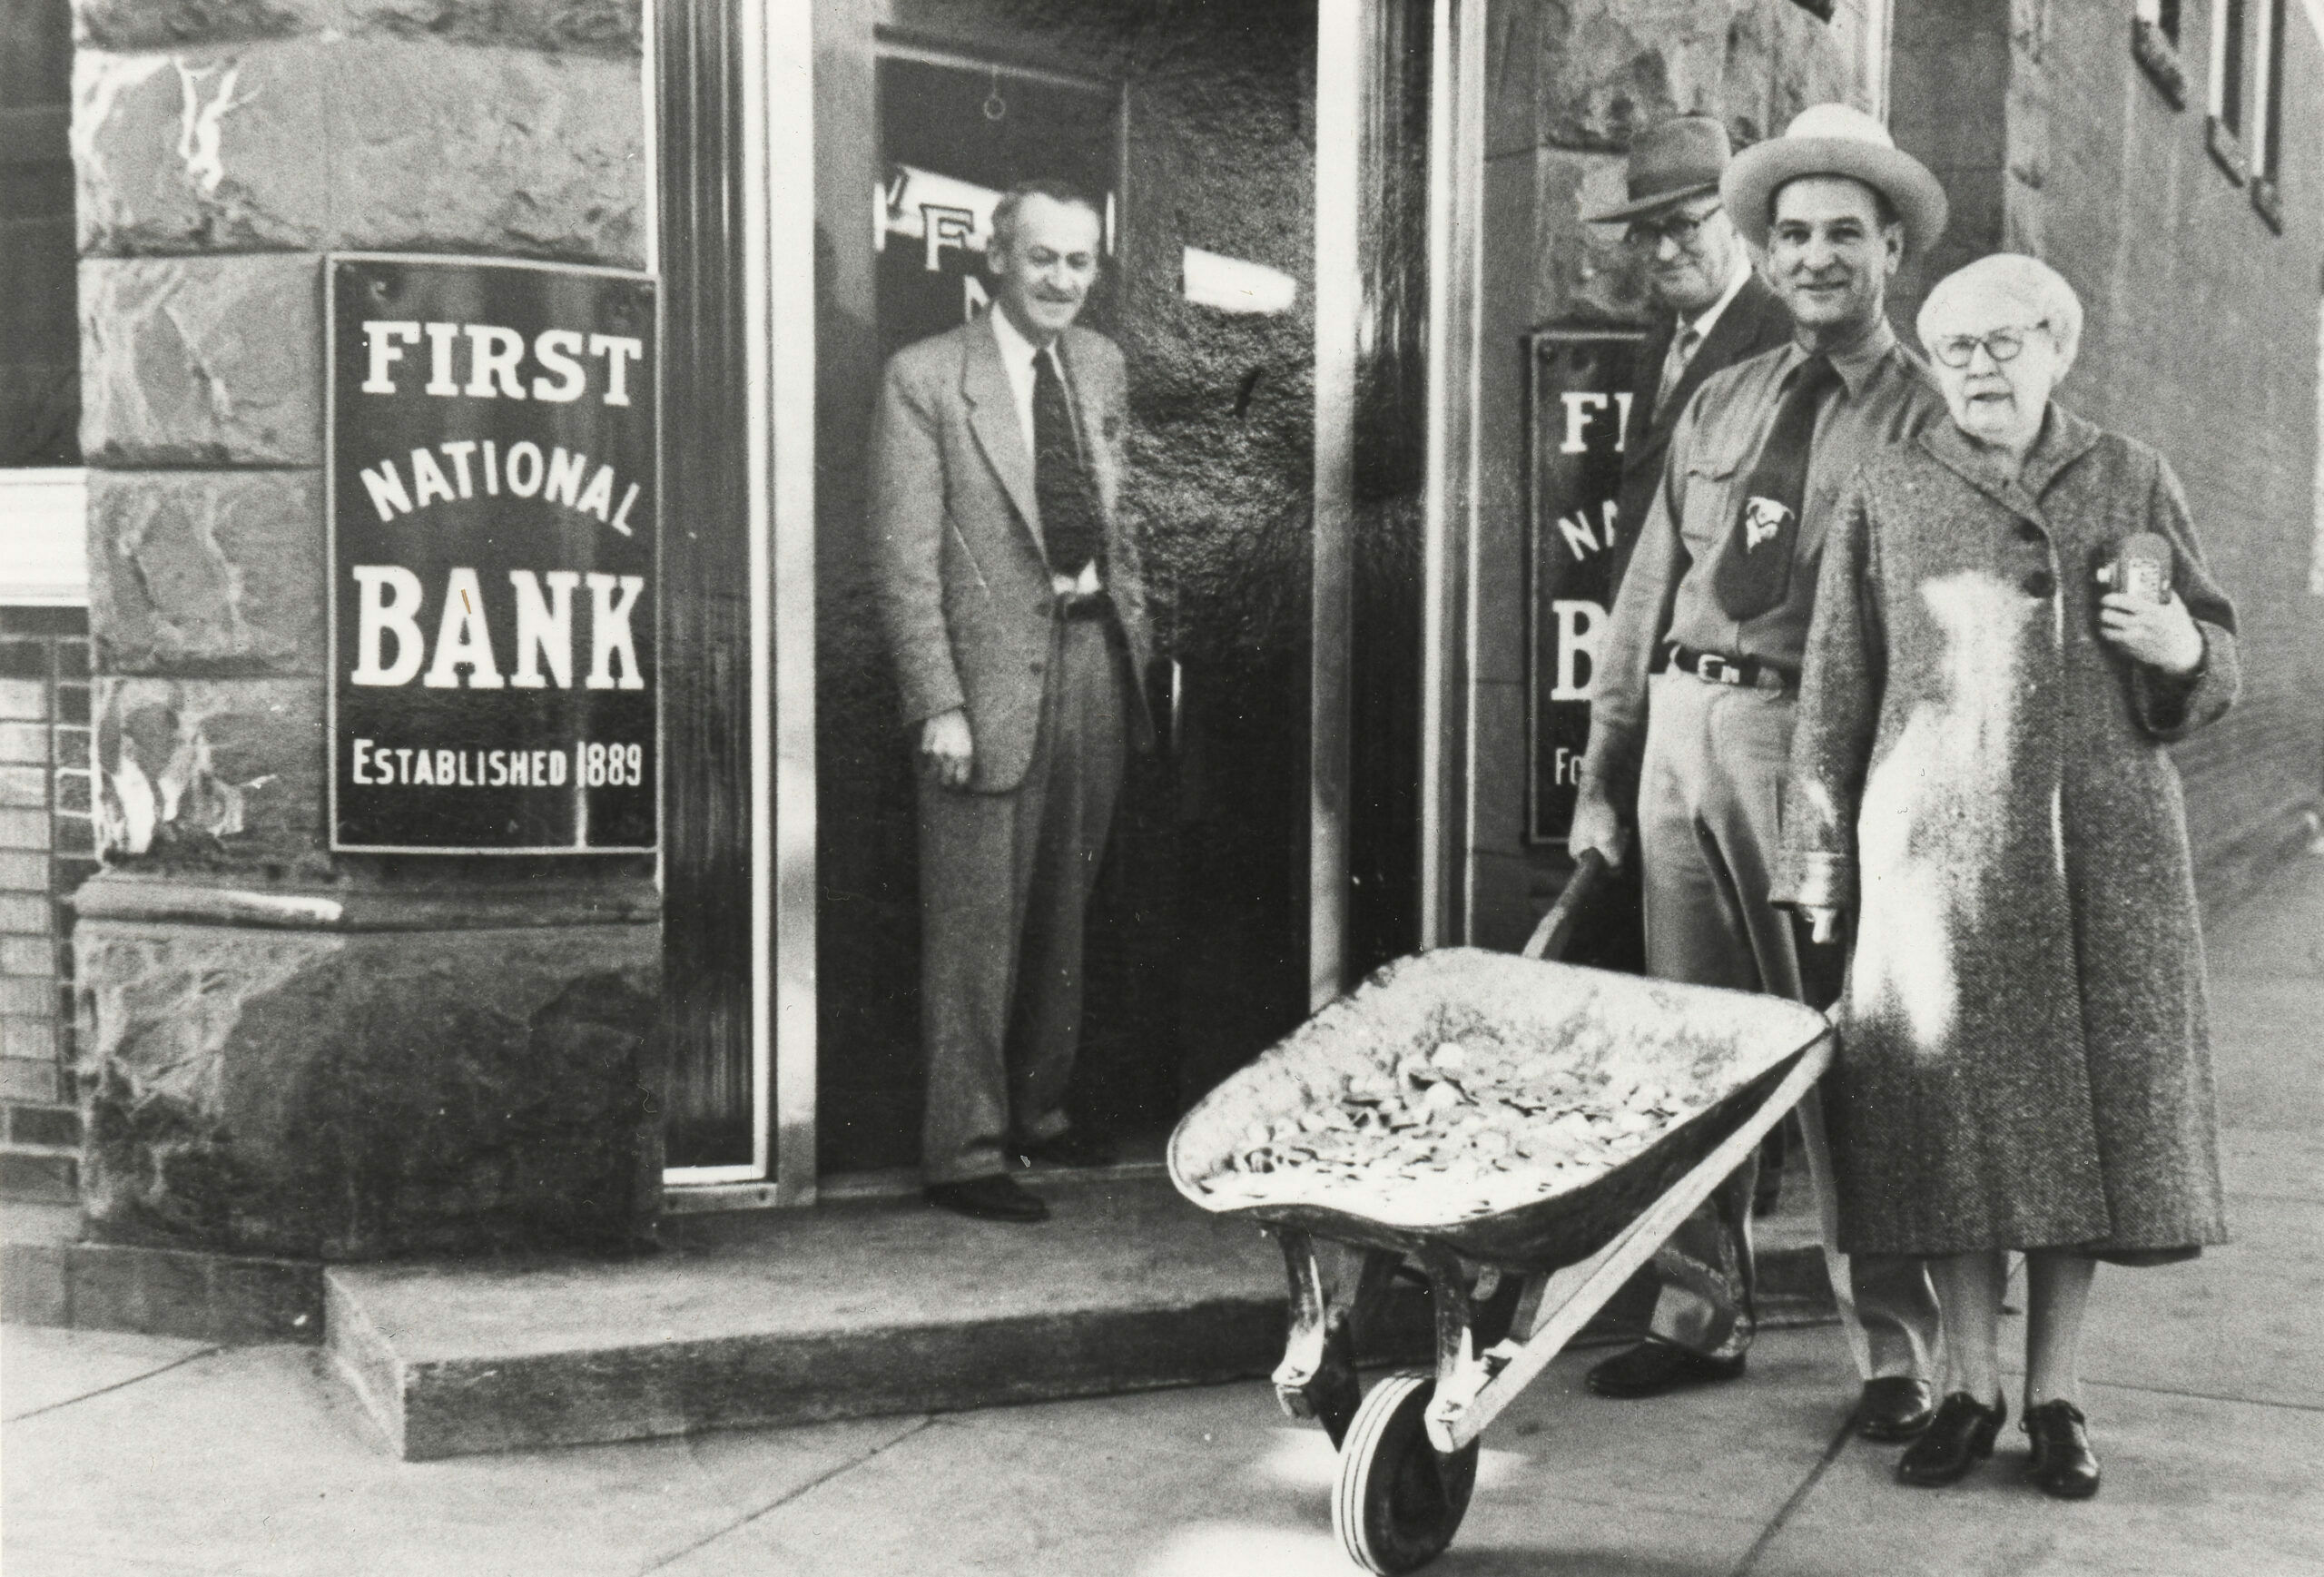 February 25, 1954 – J. Ford White, C. H. Kelleher (President, Salida Building and Loan Association), Theo. M. Jacobs, Alice Chinn (Secretary/Treasurer, Salida Building and Loan Association). A patron of the Building and Loan had paid off a mortgage with this wheelbarrow load of silver dollars. Building and Loan officers are shown on the way to deposit the silver dollars at First National Bank.